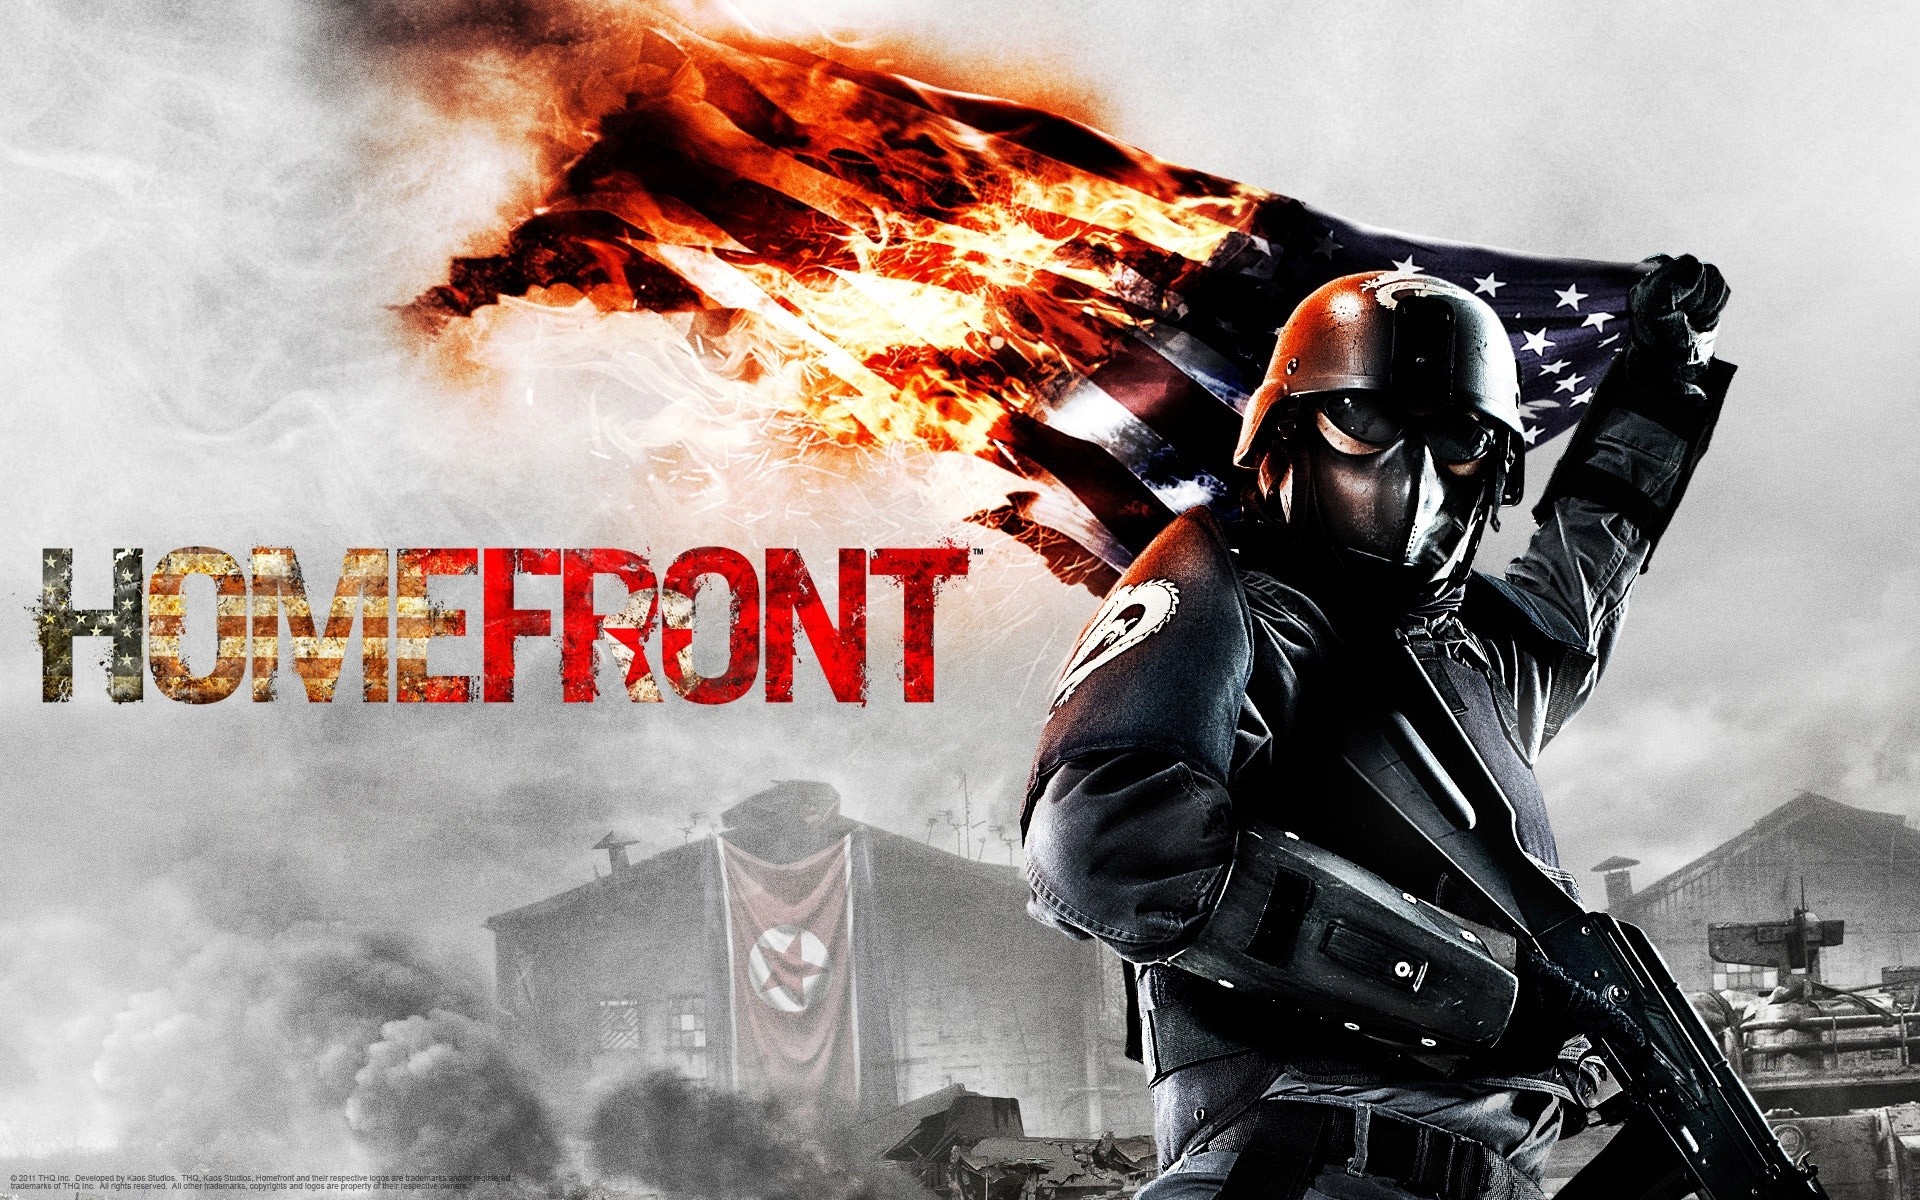 download free homefront